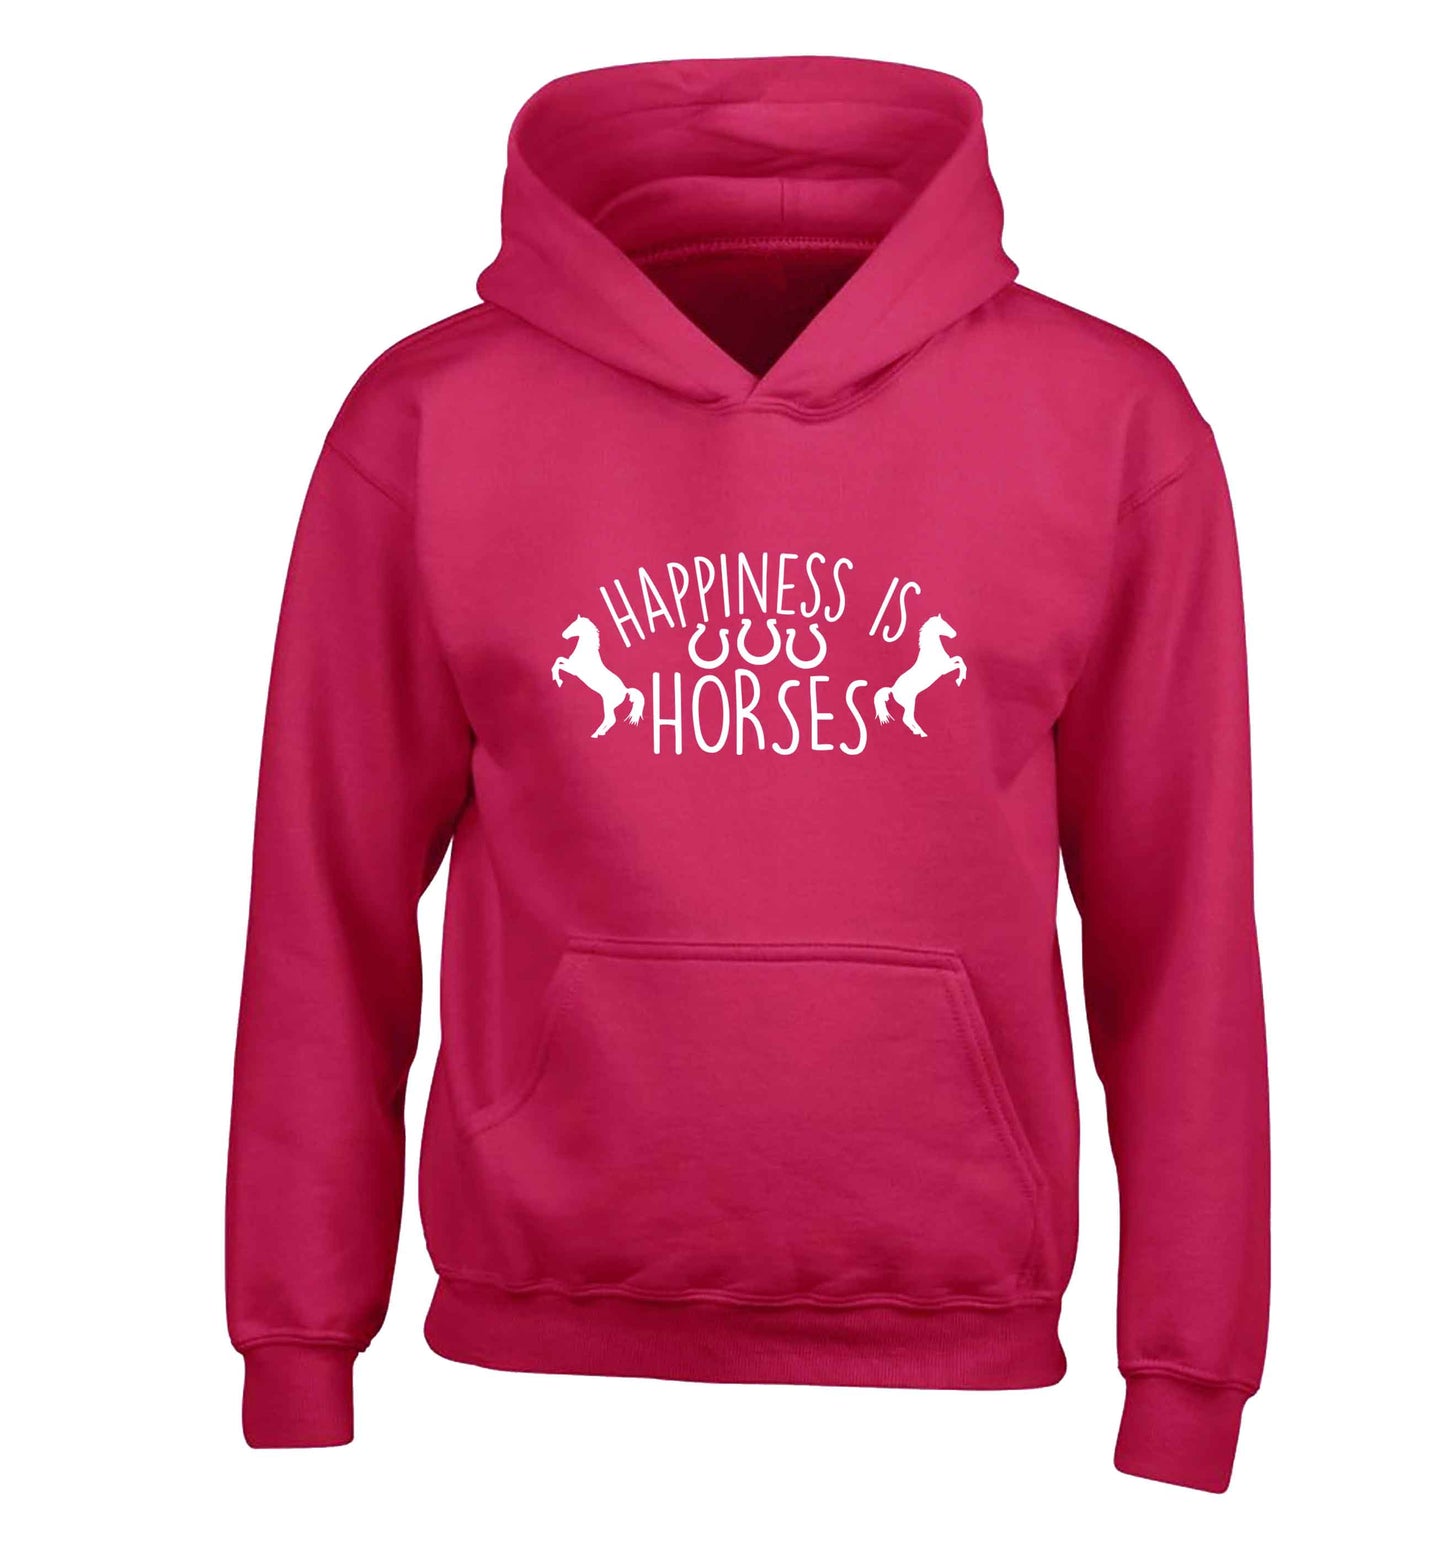 Happiness is horses children's pink hoodie 12-13 Years